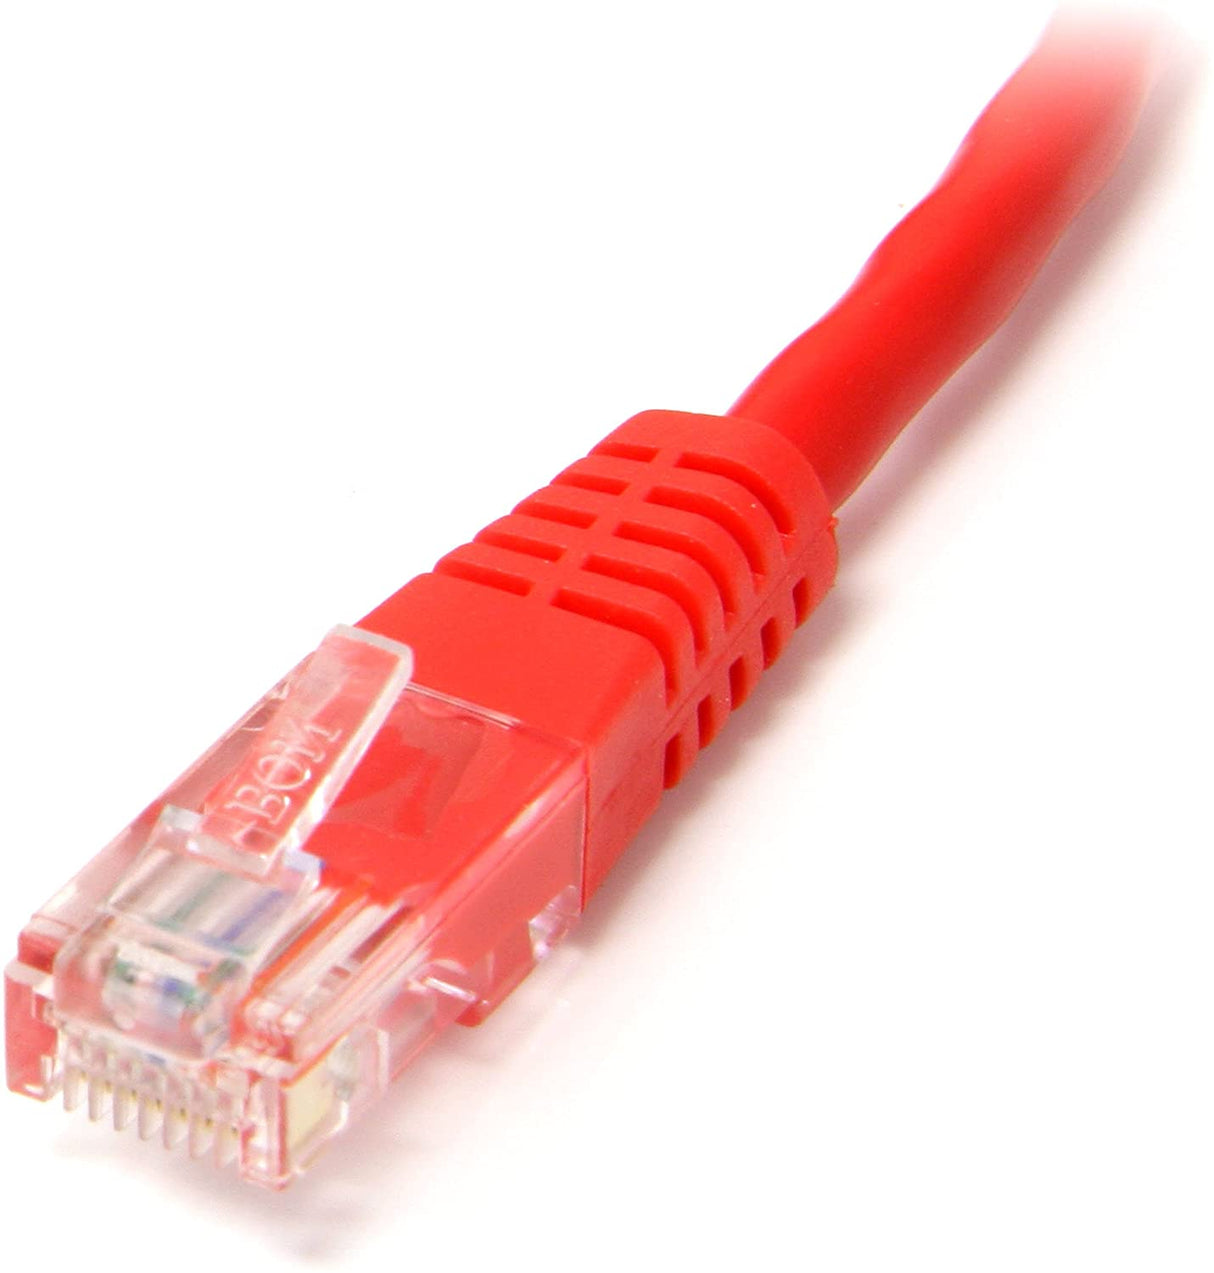 StarTech.com Cat5e Ethernet Cable - 6 ft - Red - Patch Cable - Molded Cat5e Cable - Short Network Cable - Ethernet Cord - Cat 5e Cable - 6ft (M45PATCH6RD) 6 ft / 2m Red